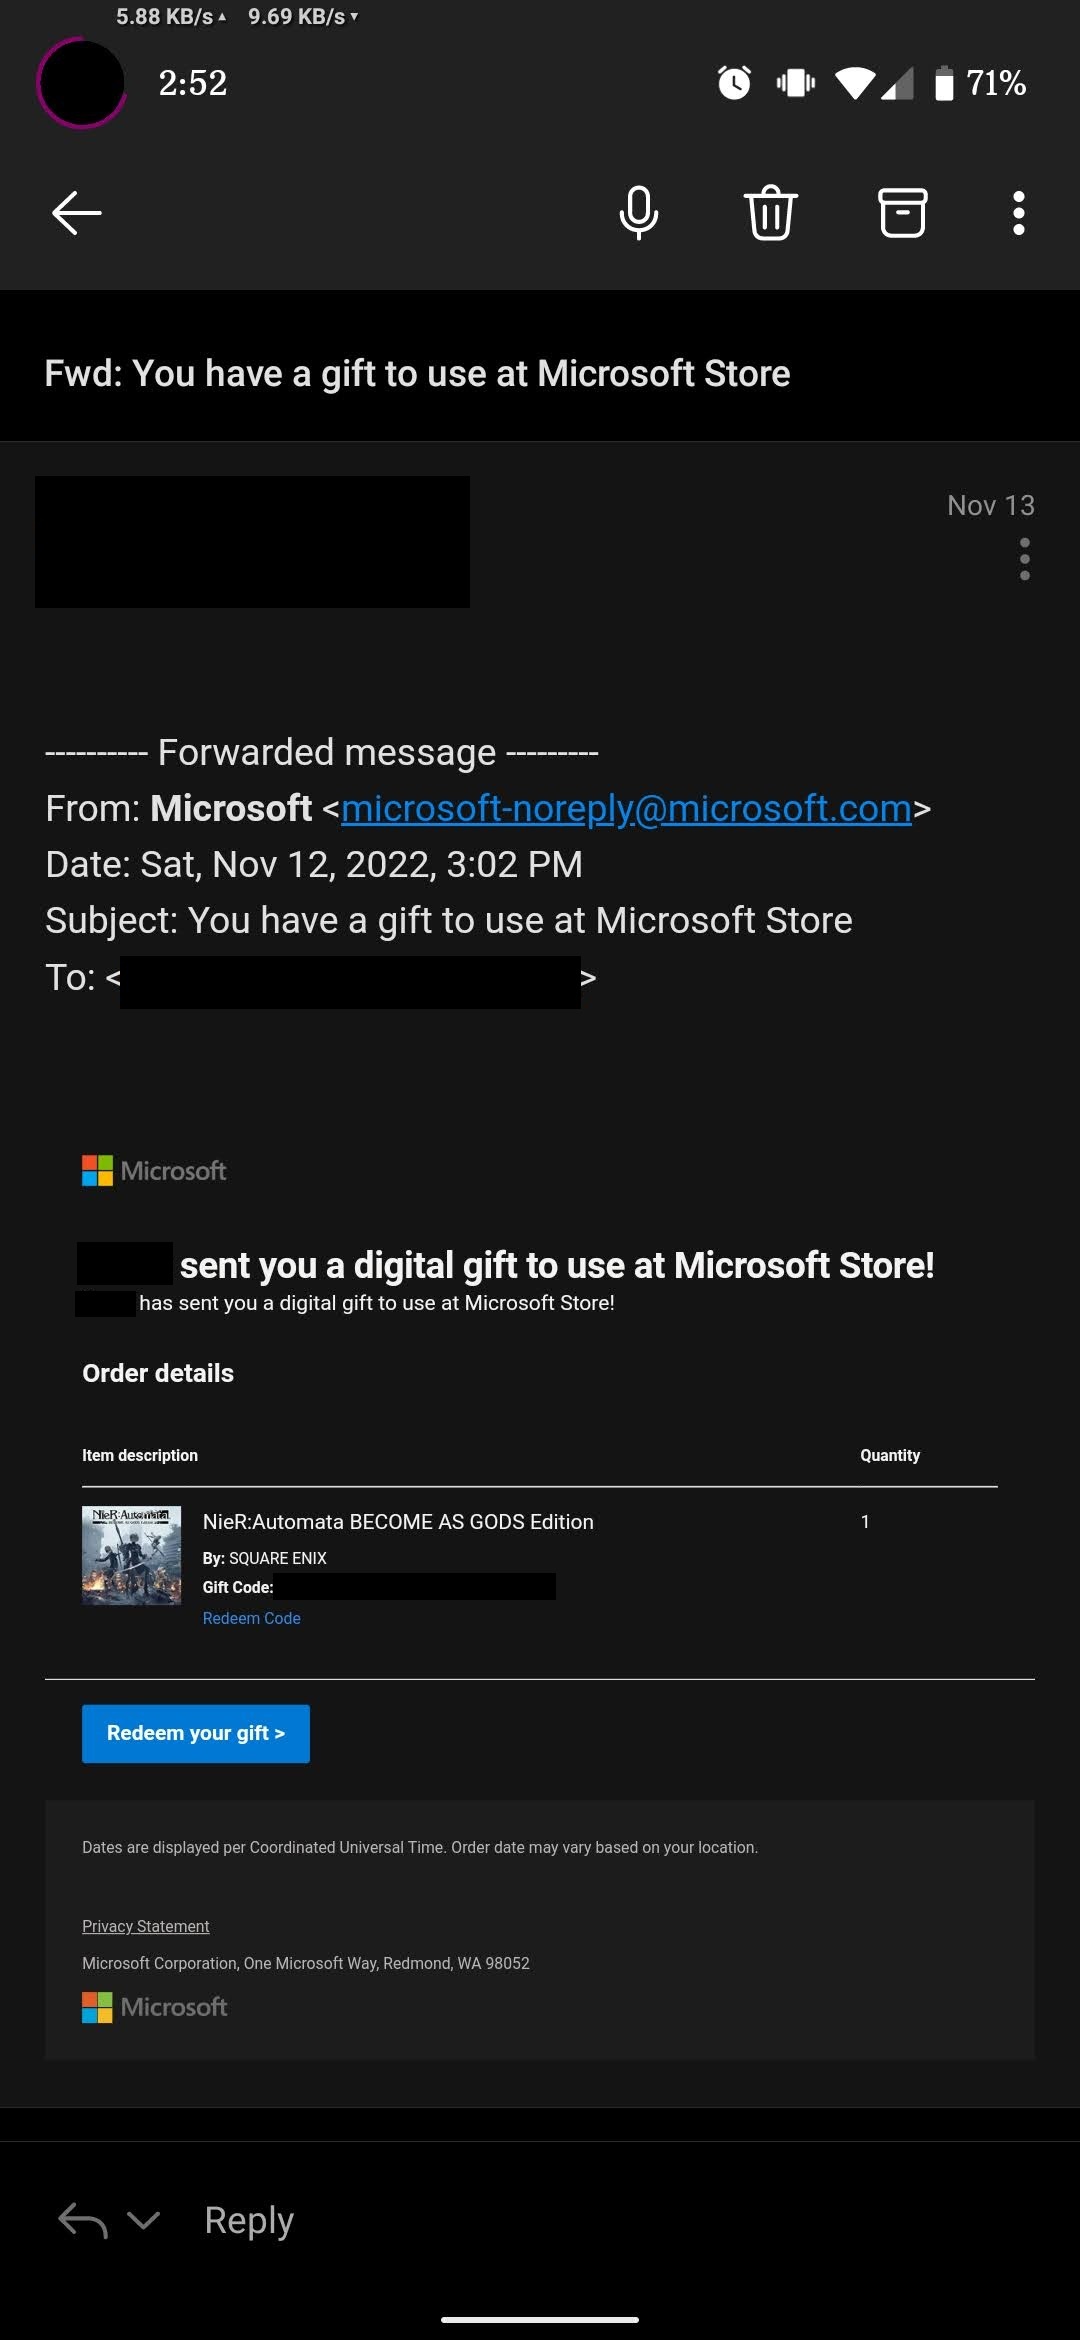 Mediator vinde Lagring How can I dispute a refund request that was denied? - Microsoft Community